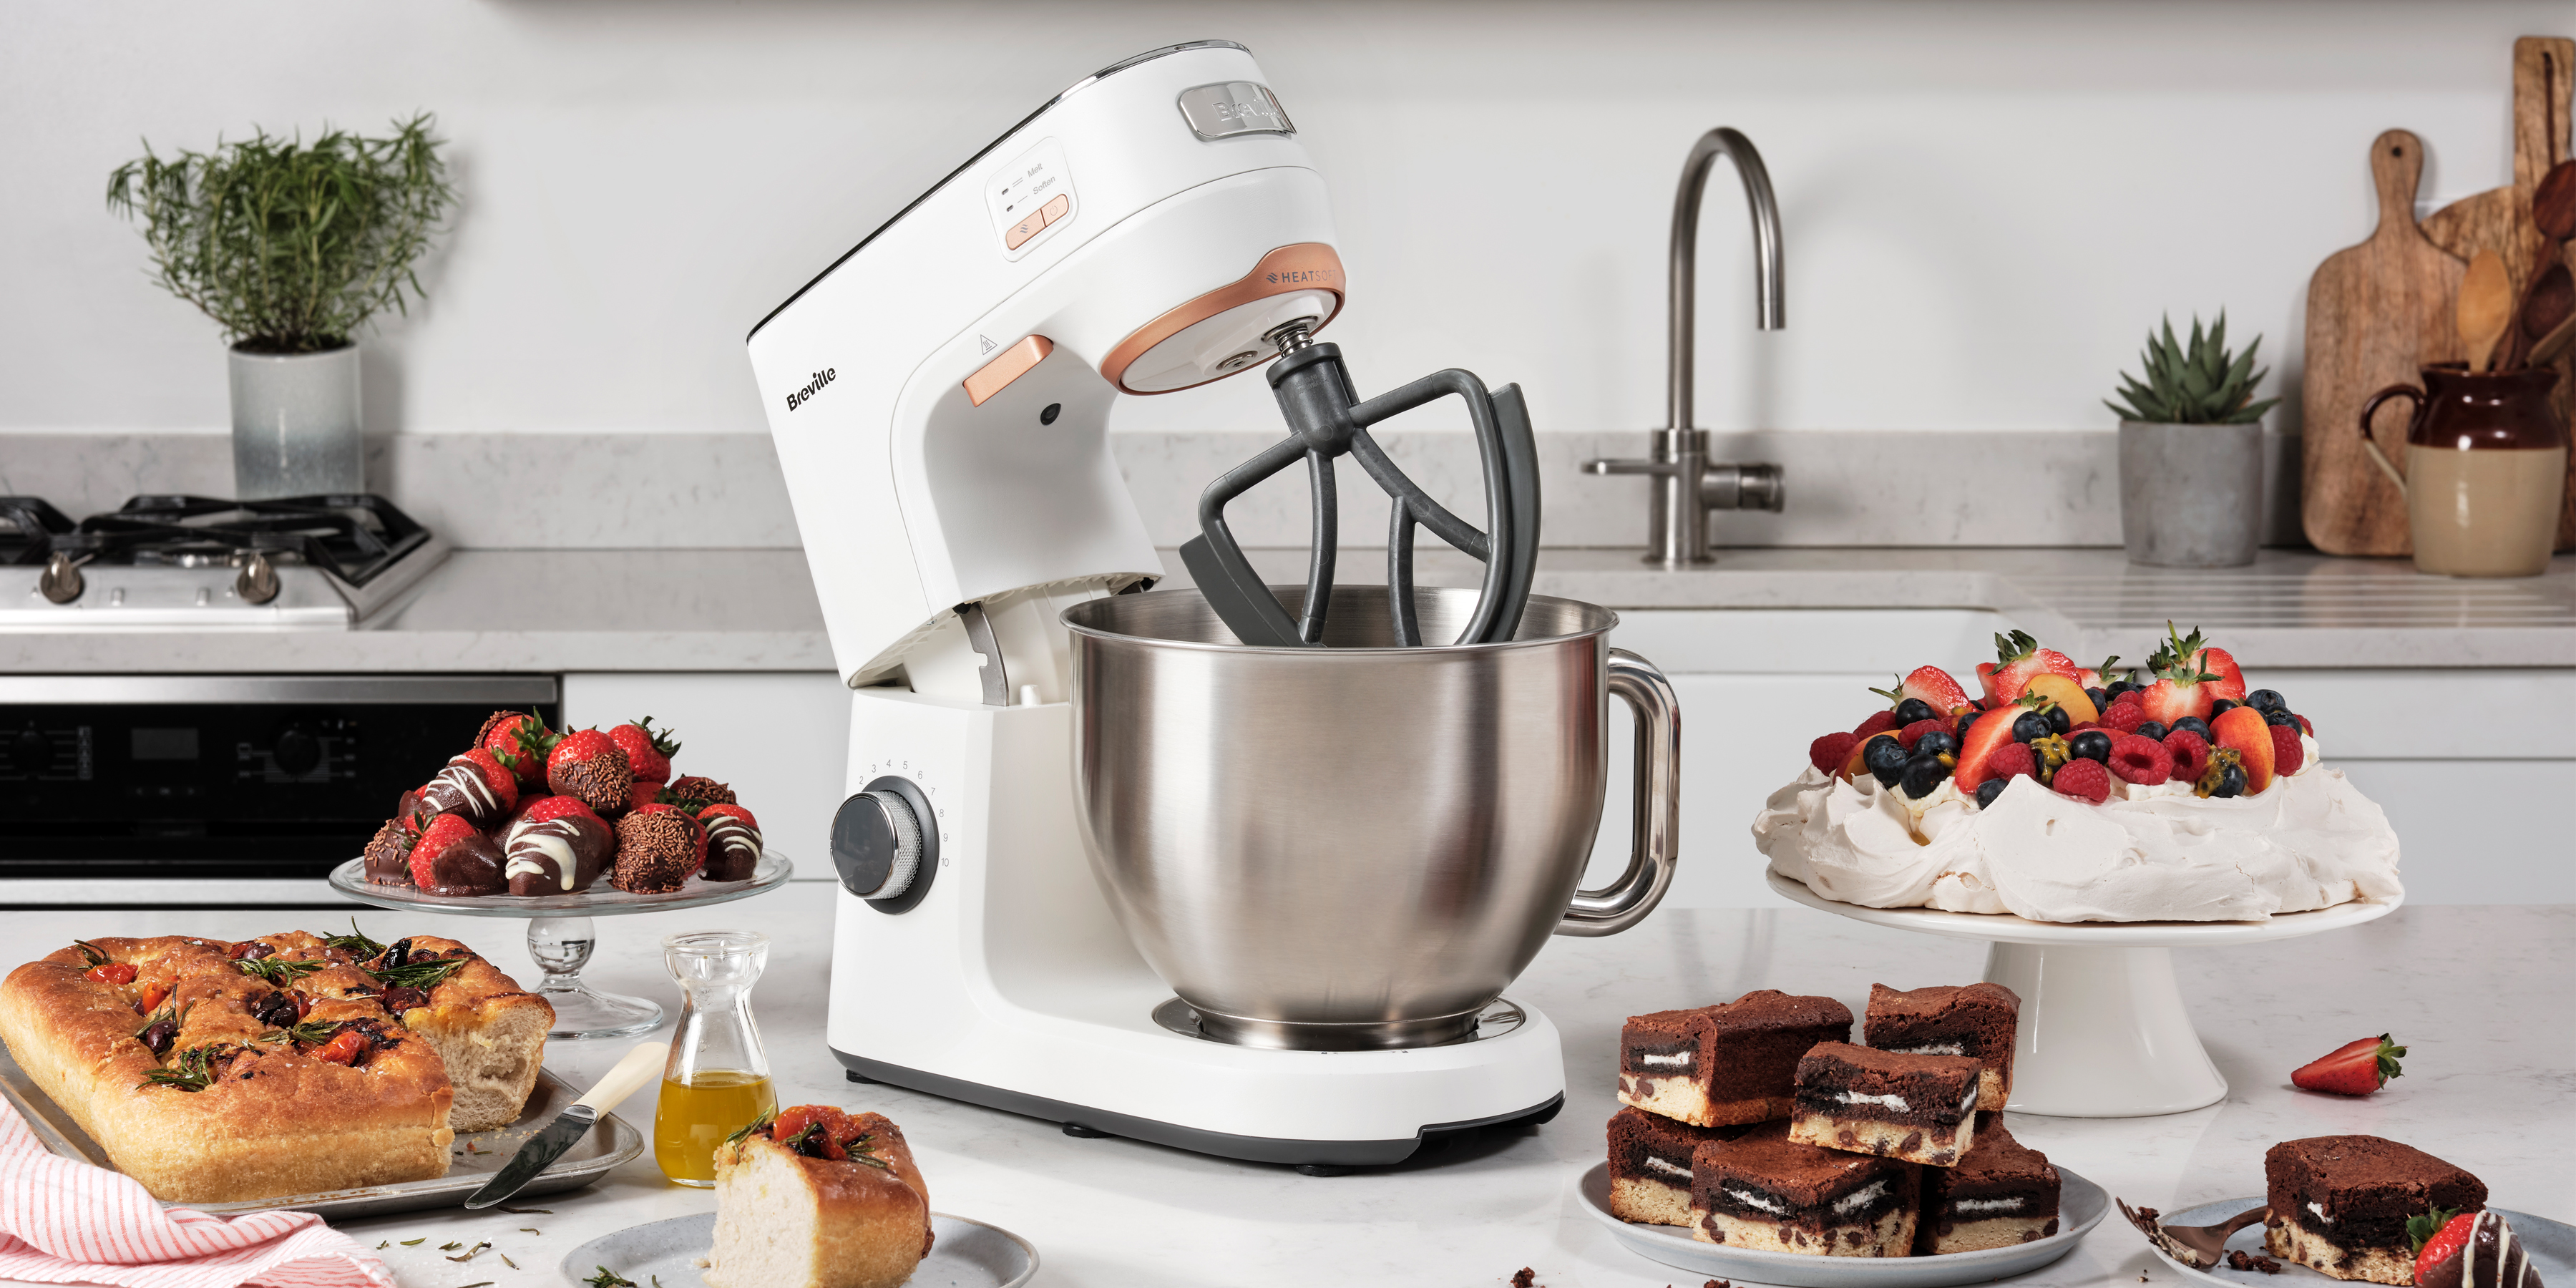 Breville HeatSoft review: the hand mixer with heat technology